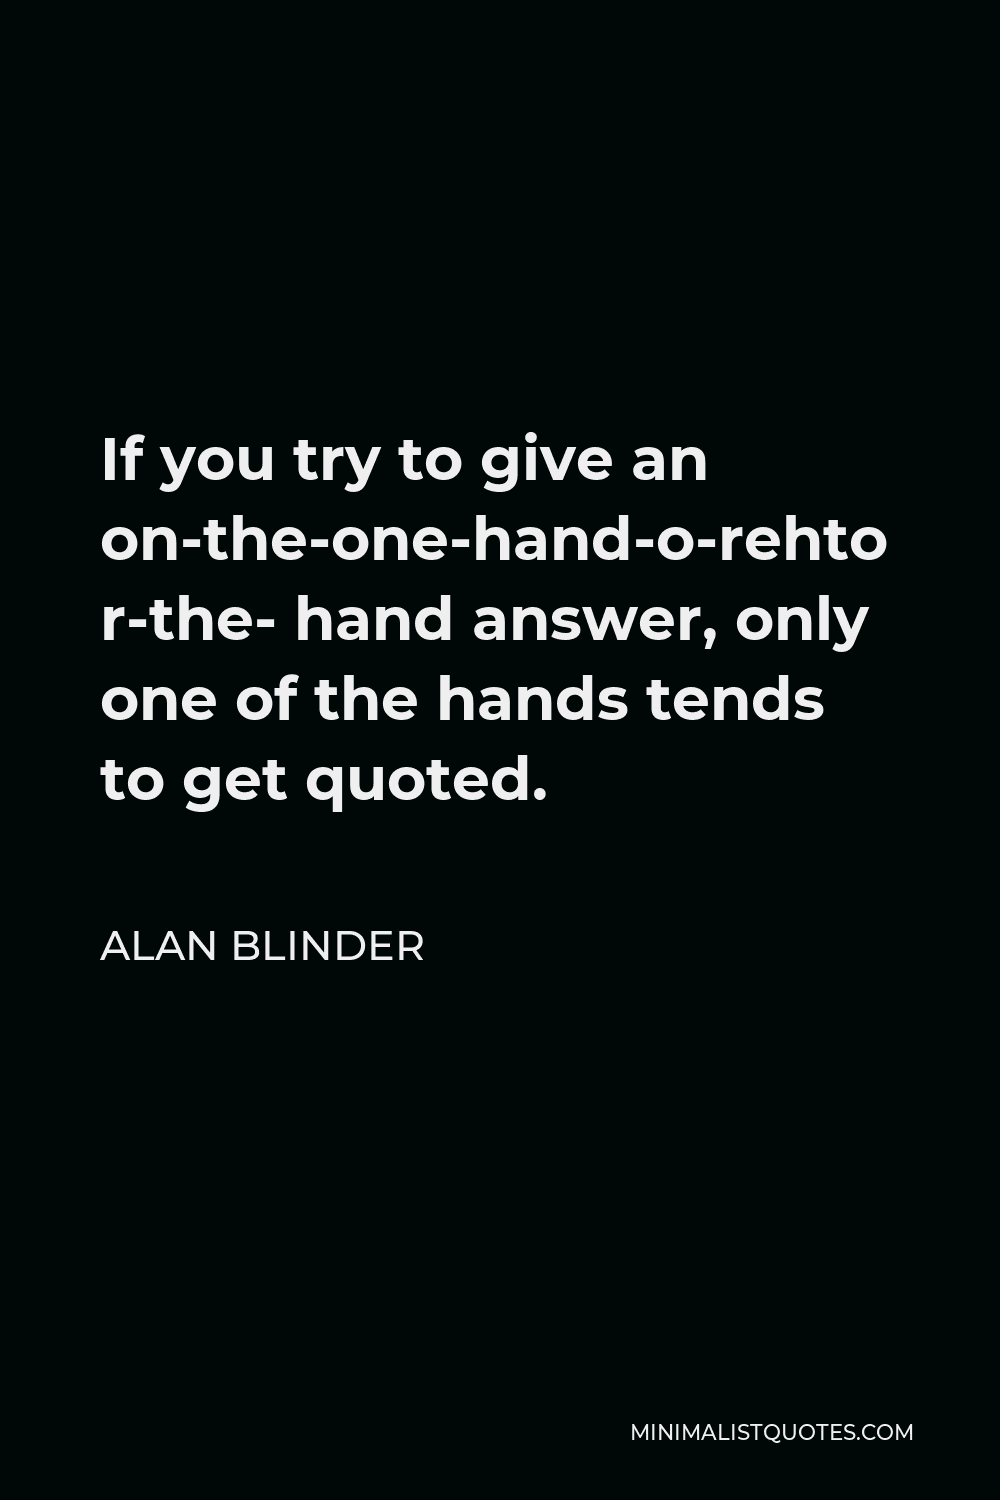 Alan Blinder Quote - If you try to give an on-the-one-hand-or-the-other- hand answer, only one of the hands tends to get quoted.